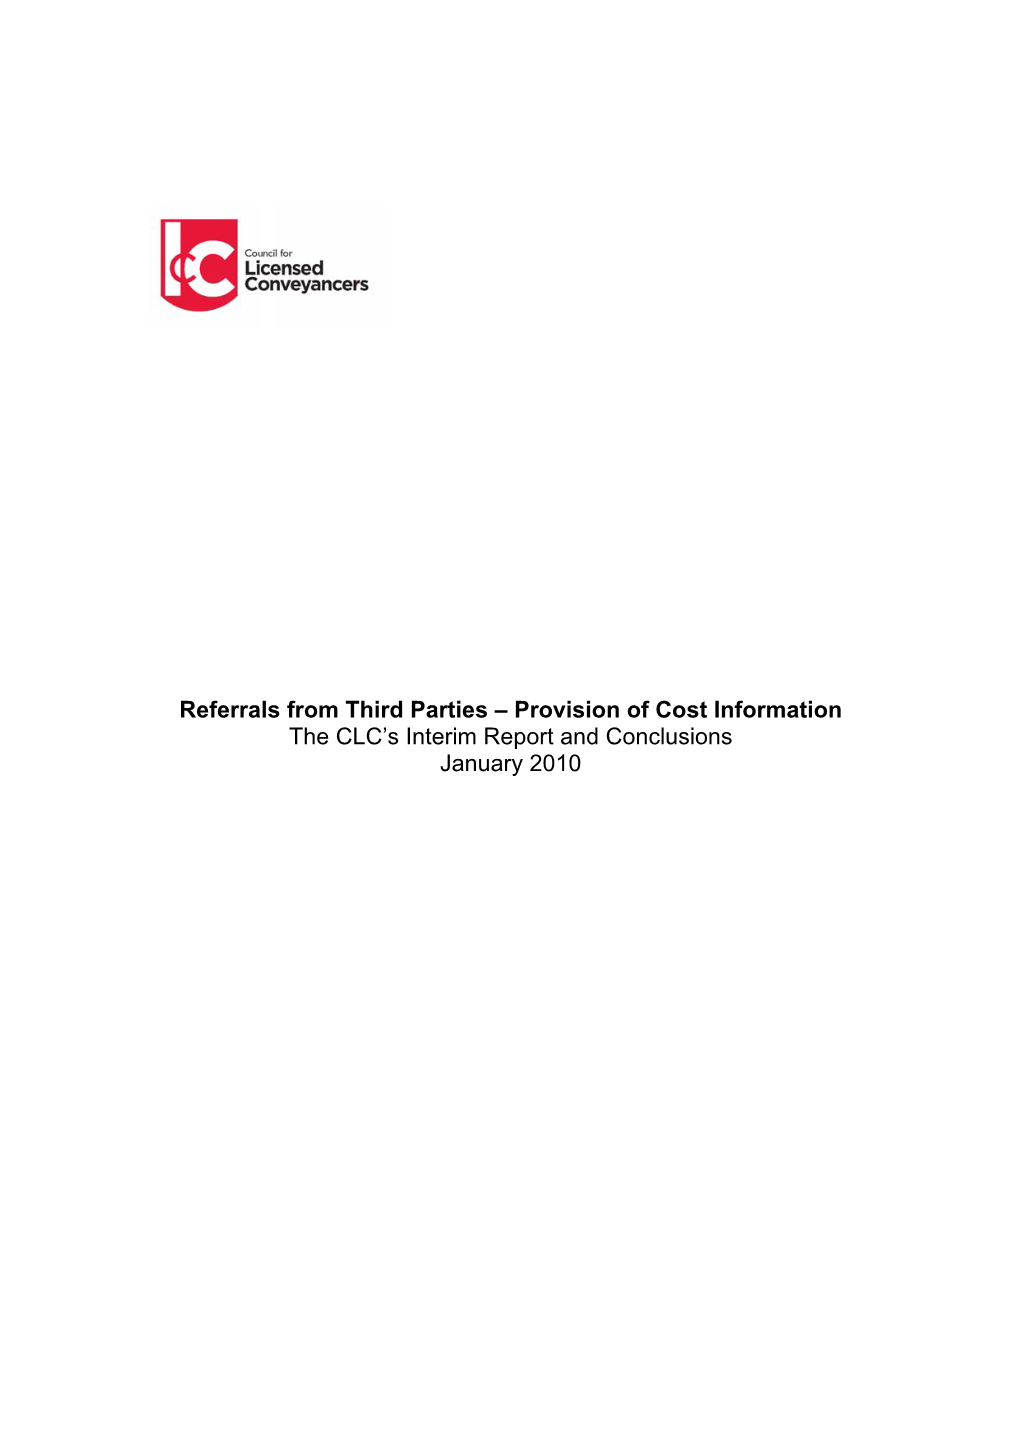 Referrals from Third Parties – Provision of Cost Information the CLC’S Interim Report and Conclusions January 2010